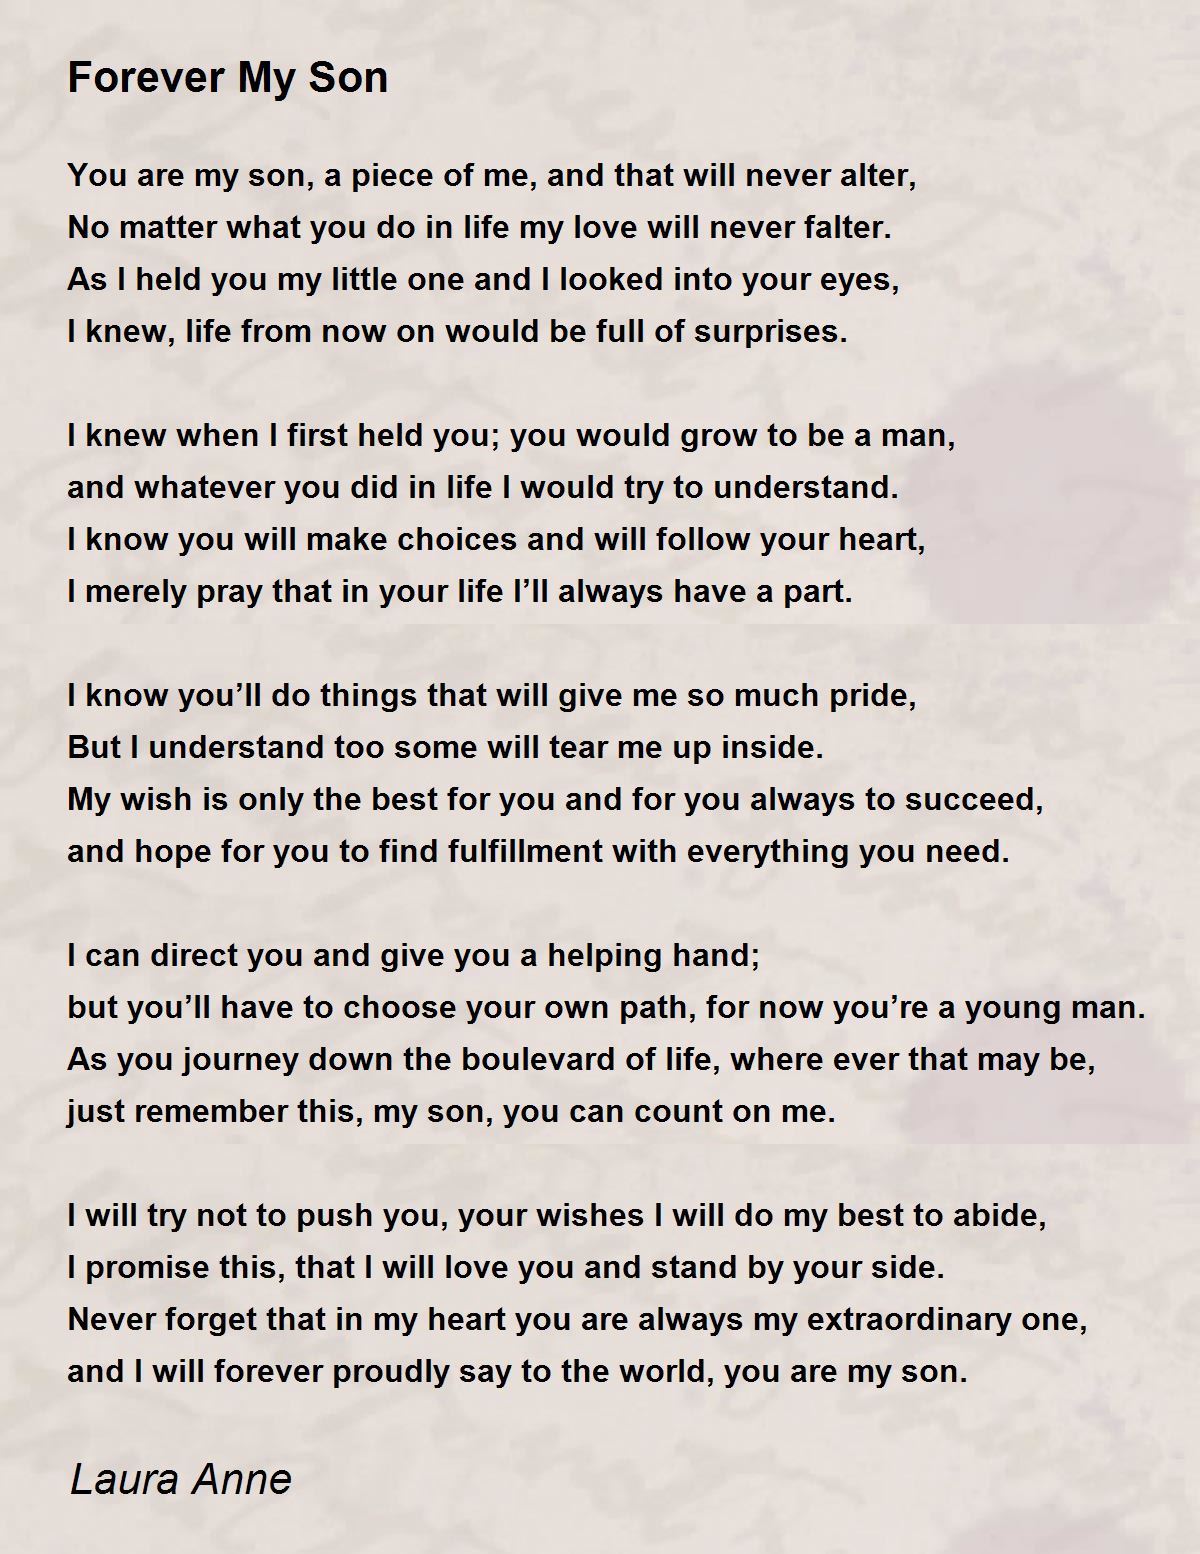 always and forever poems for him